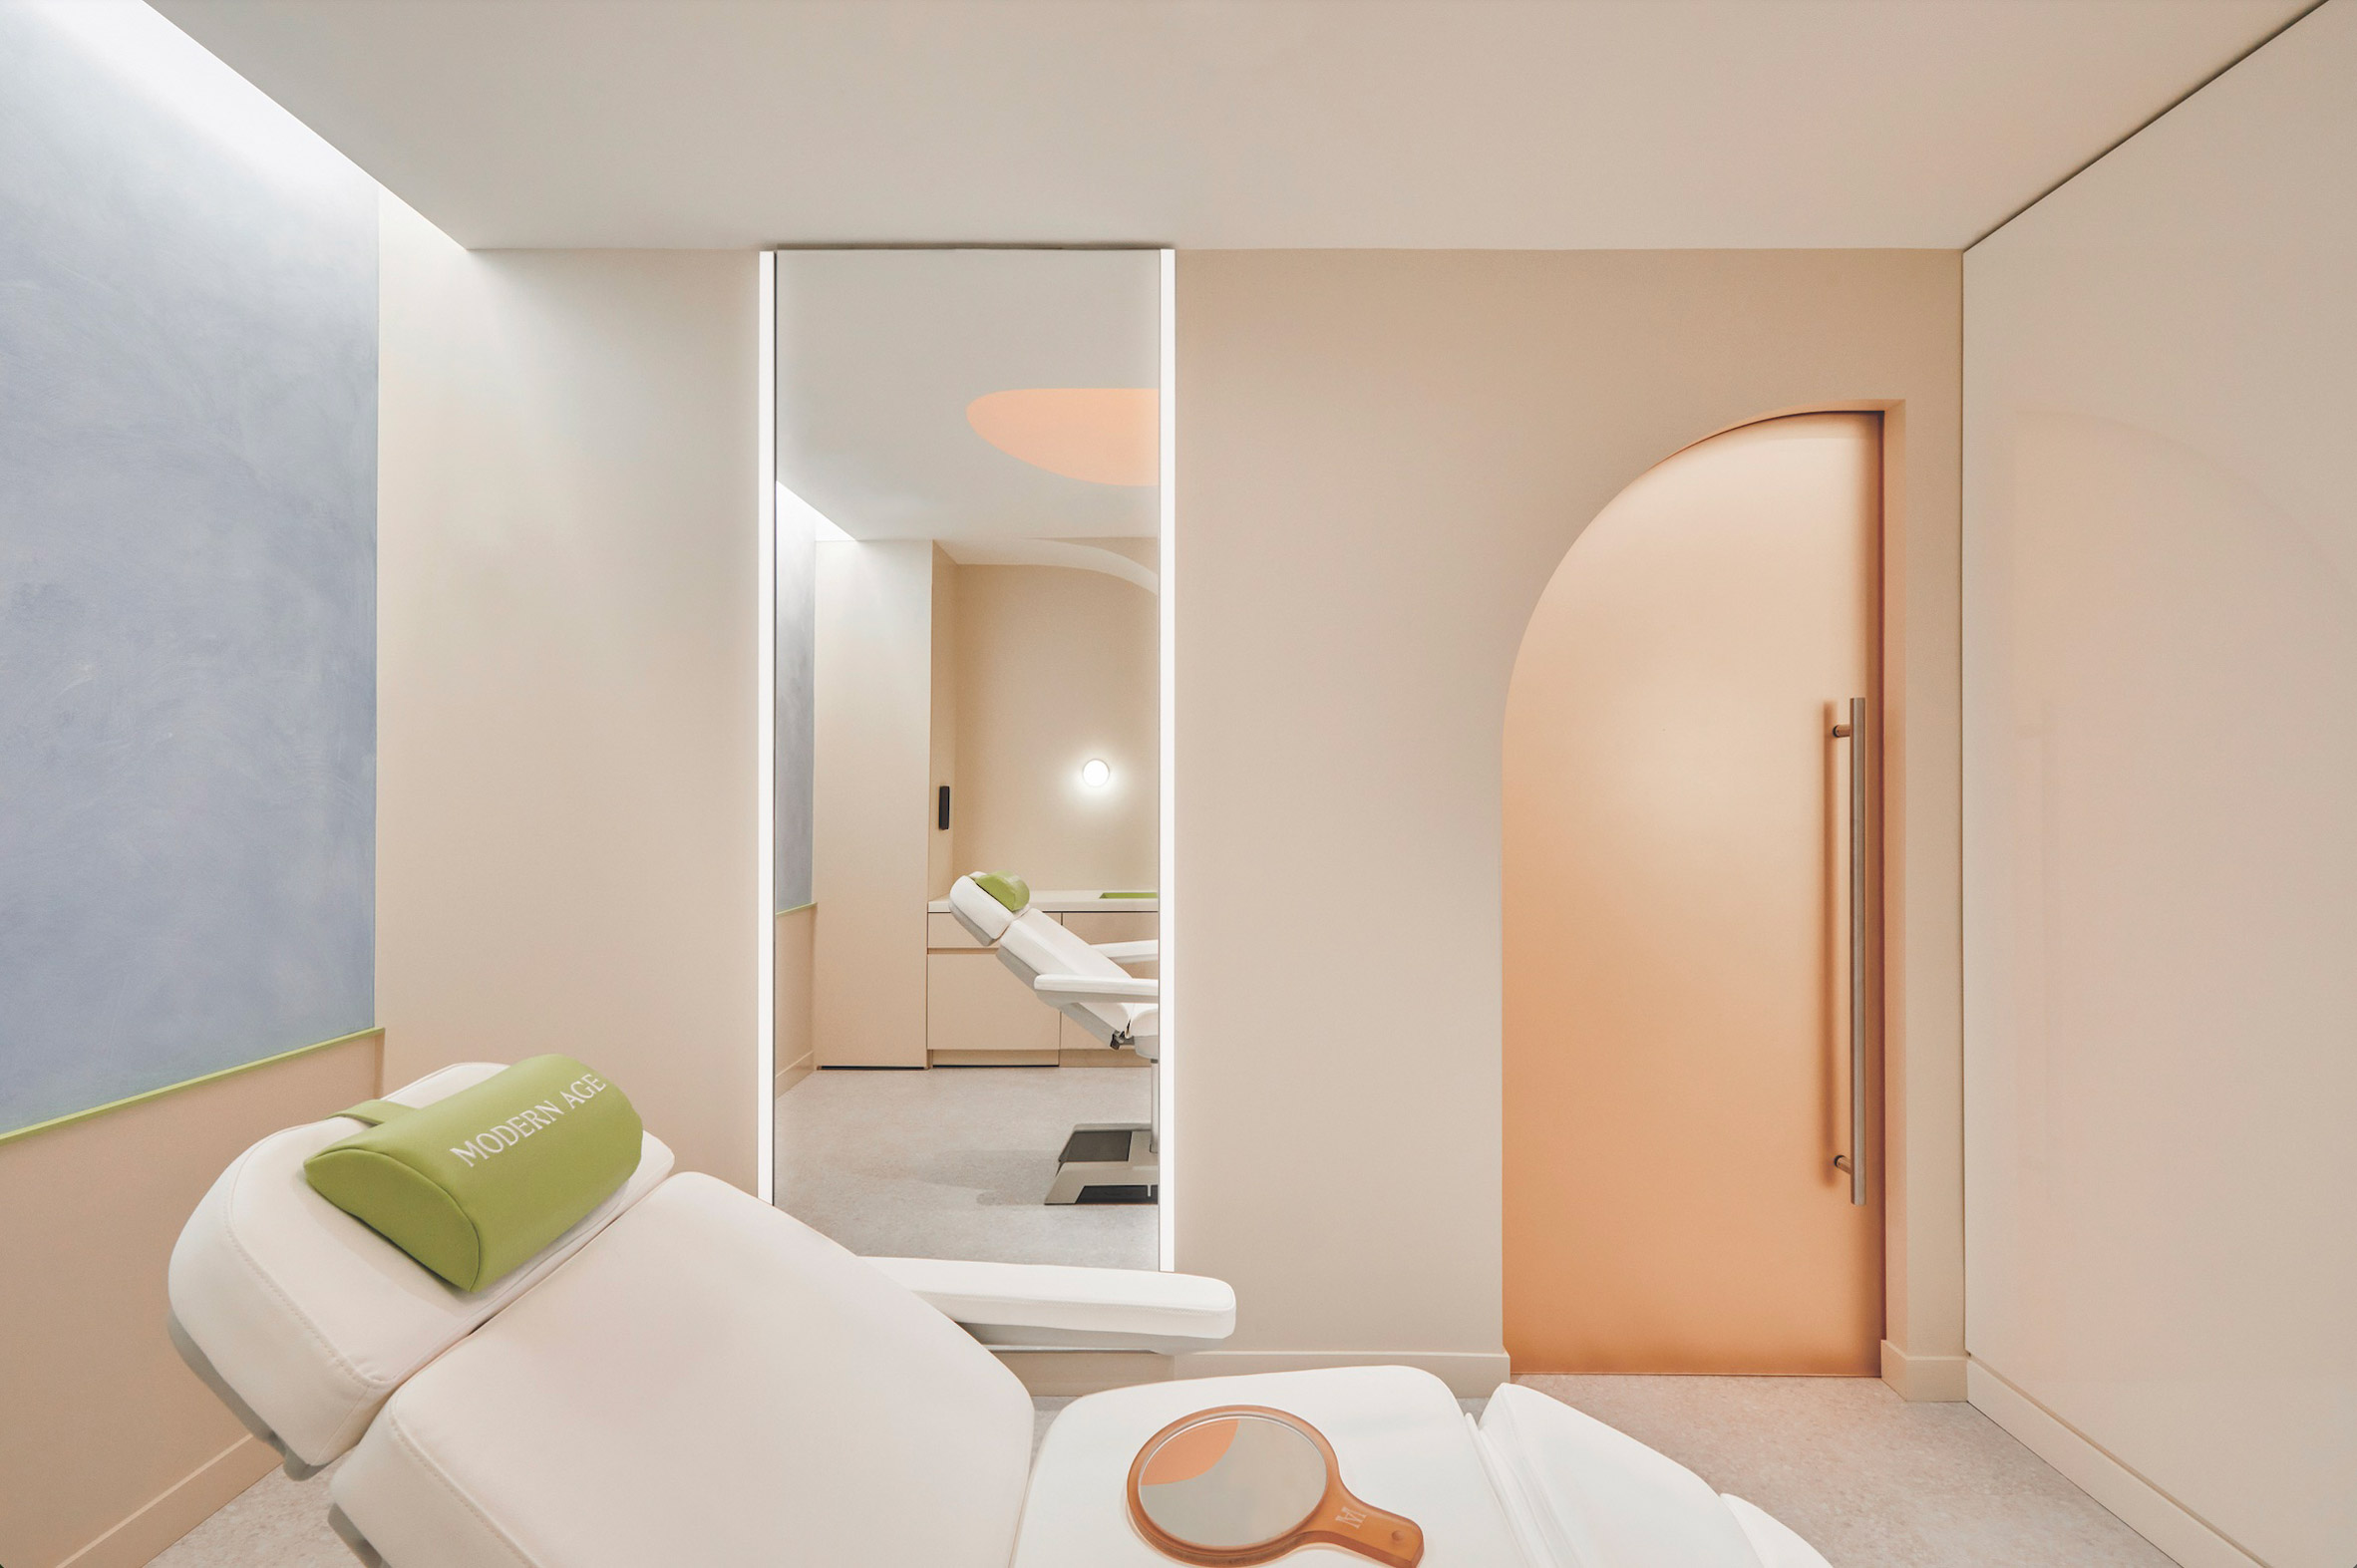 Suite at the Modern Age studio with a treatment bed in the foreground and peachy coral resin door in the background